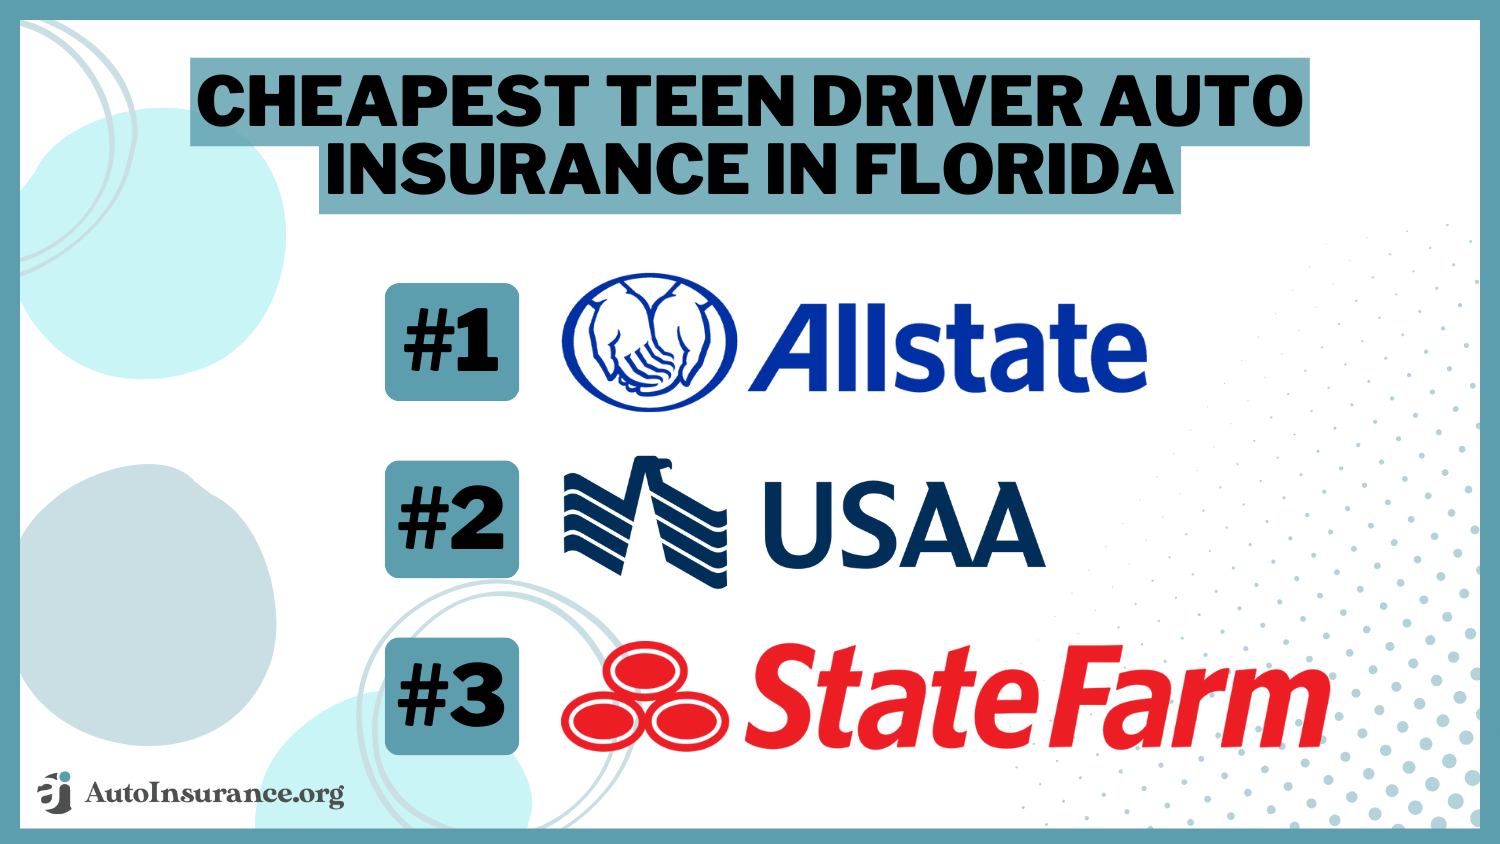 Cheapest Teen Driver Auto Insurance In Florida - Allstate, USAA, State Farm